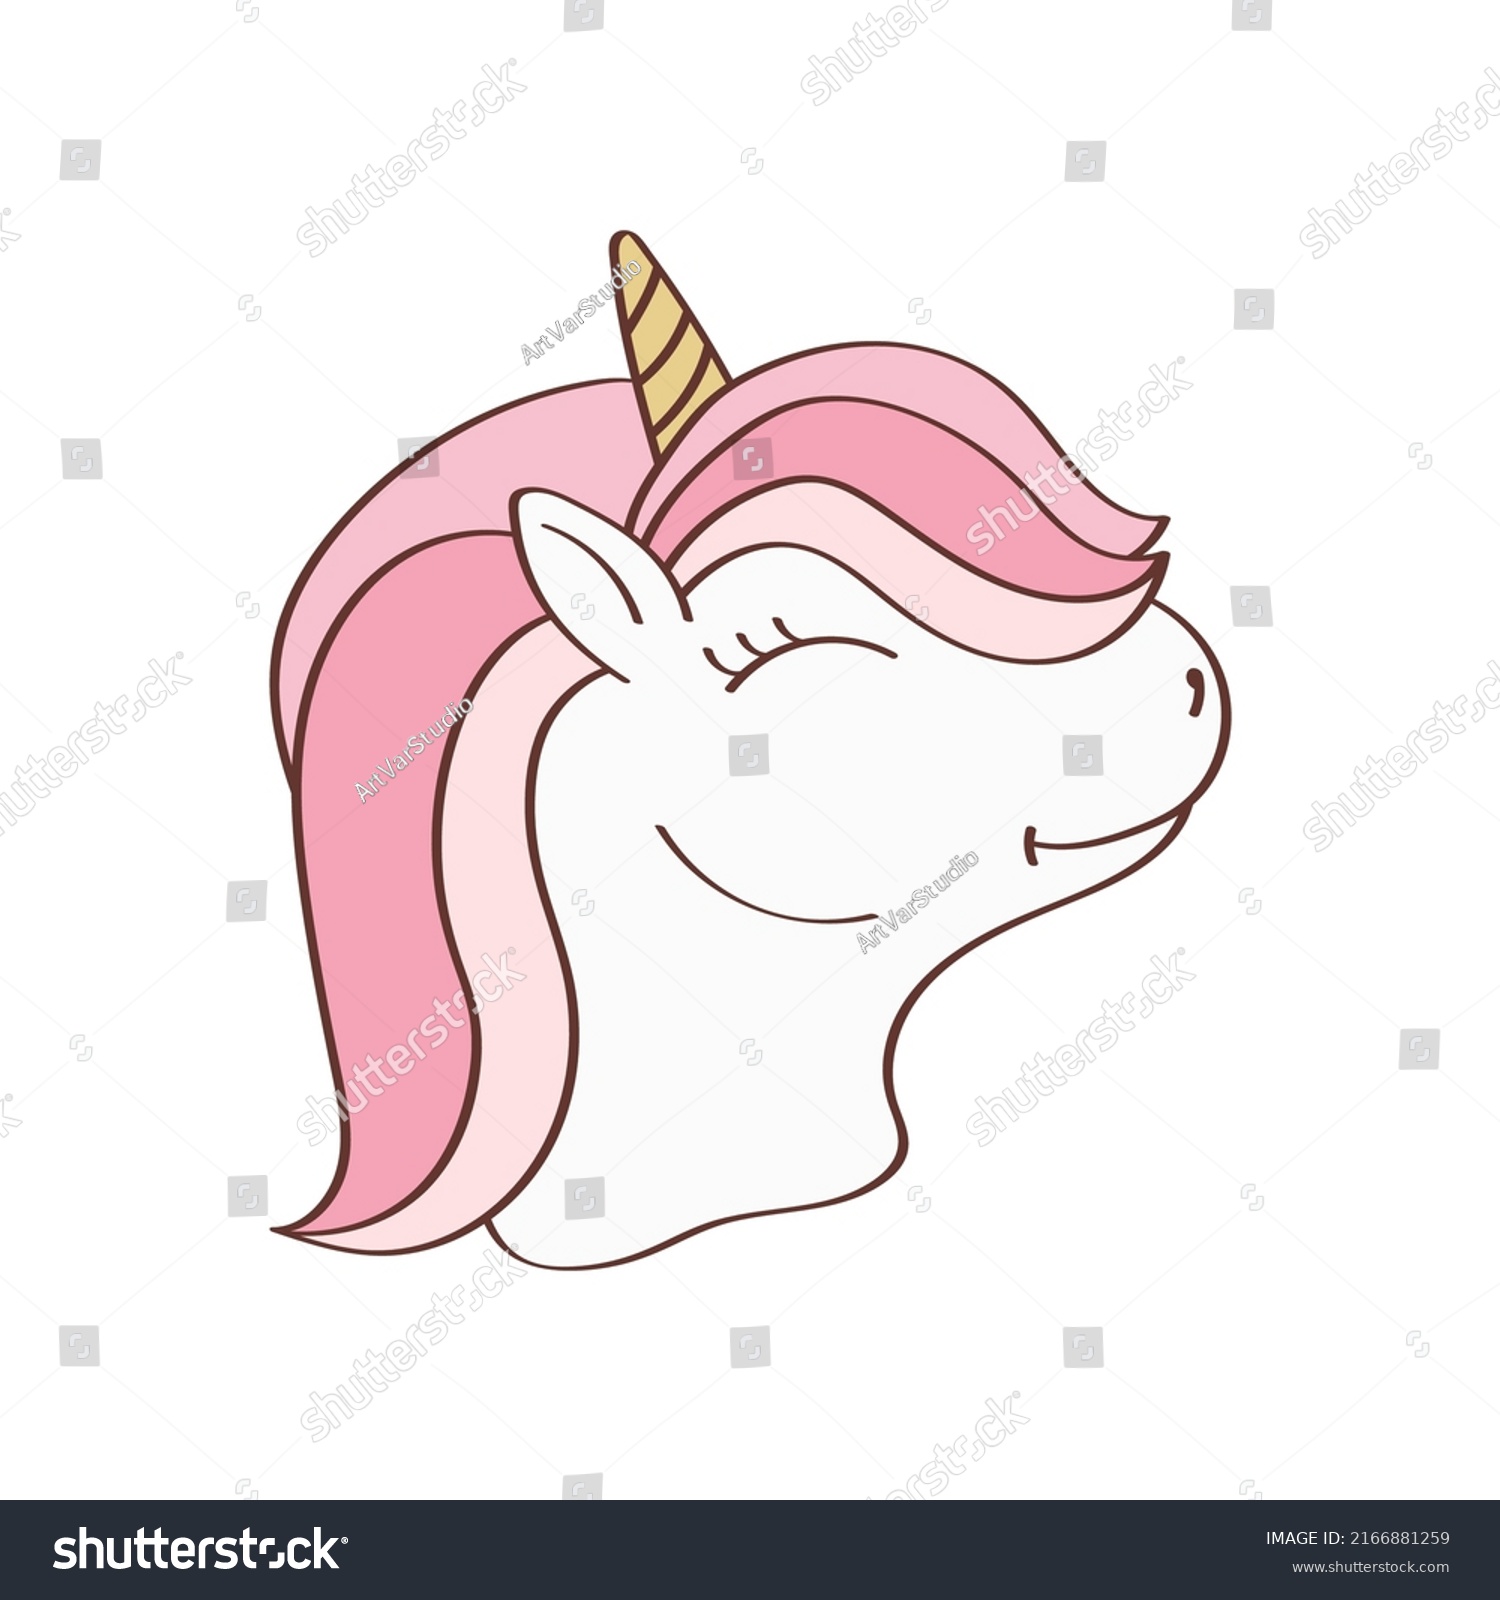 SVG of Cute Unicorn Face Clipart Isolated on White Background. Funny Clip Art Unicorn Head. Vector Illustration of an Animal for Stickers, Baby Shower Invitation, Prints for Clothes.  svg